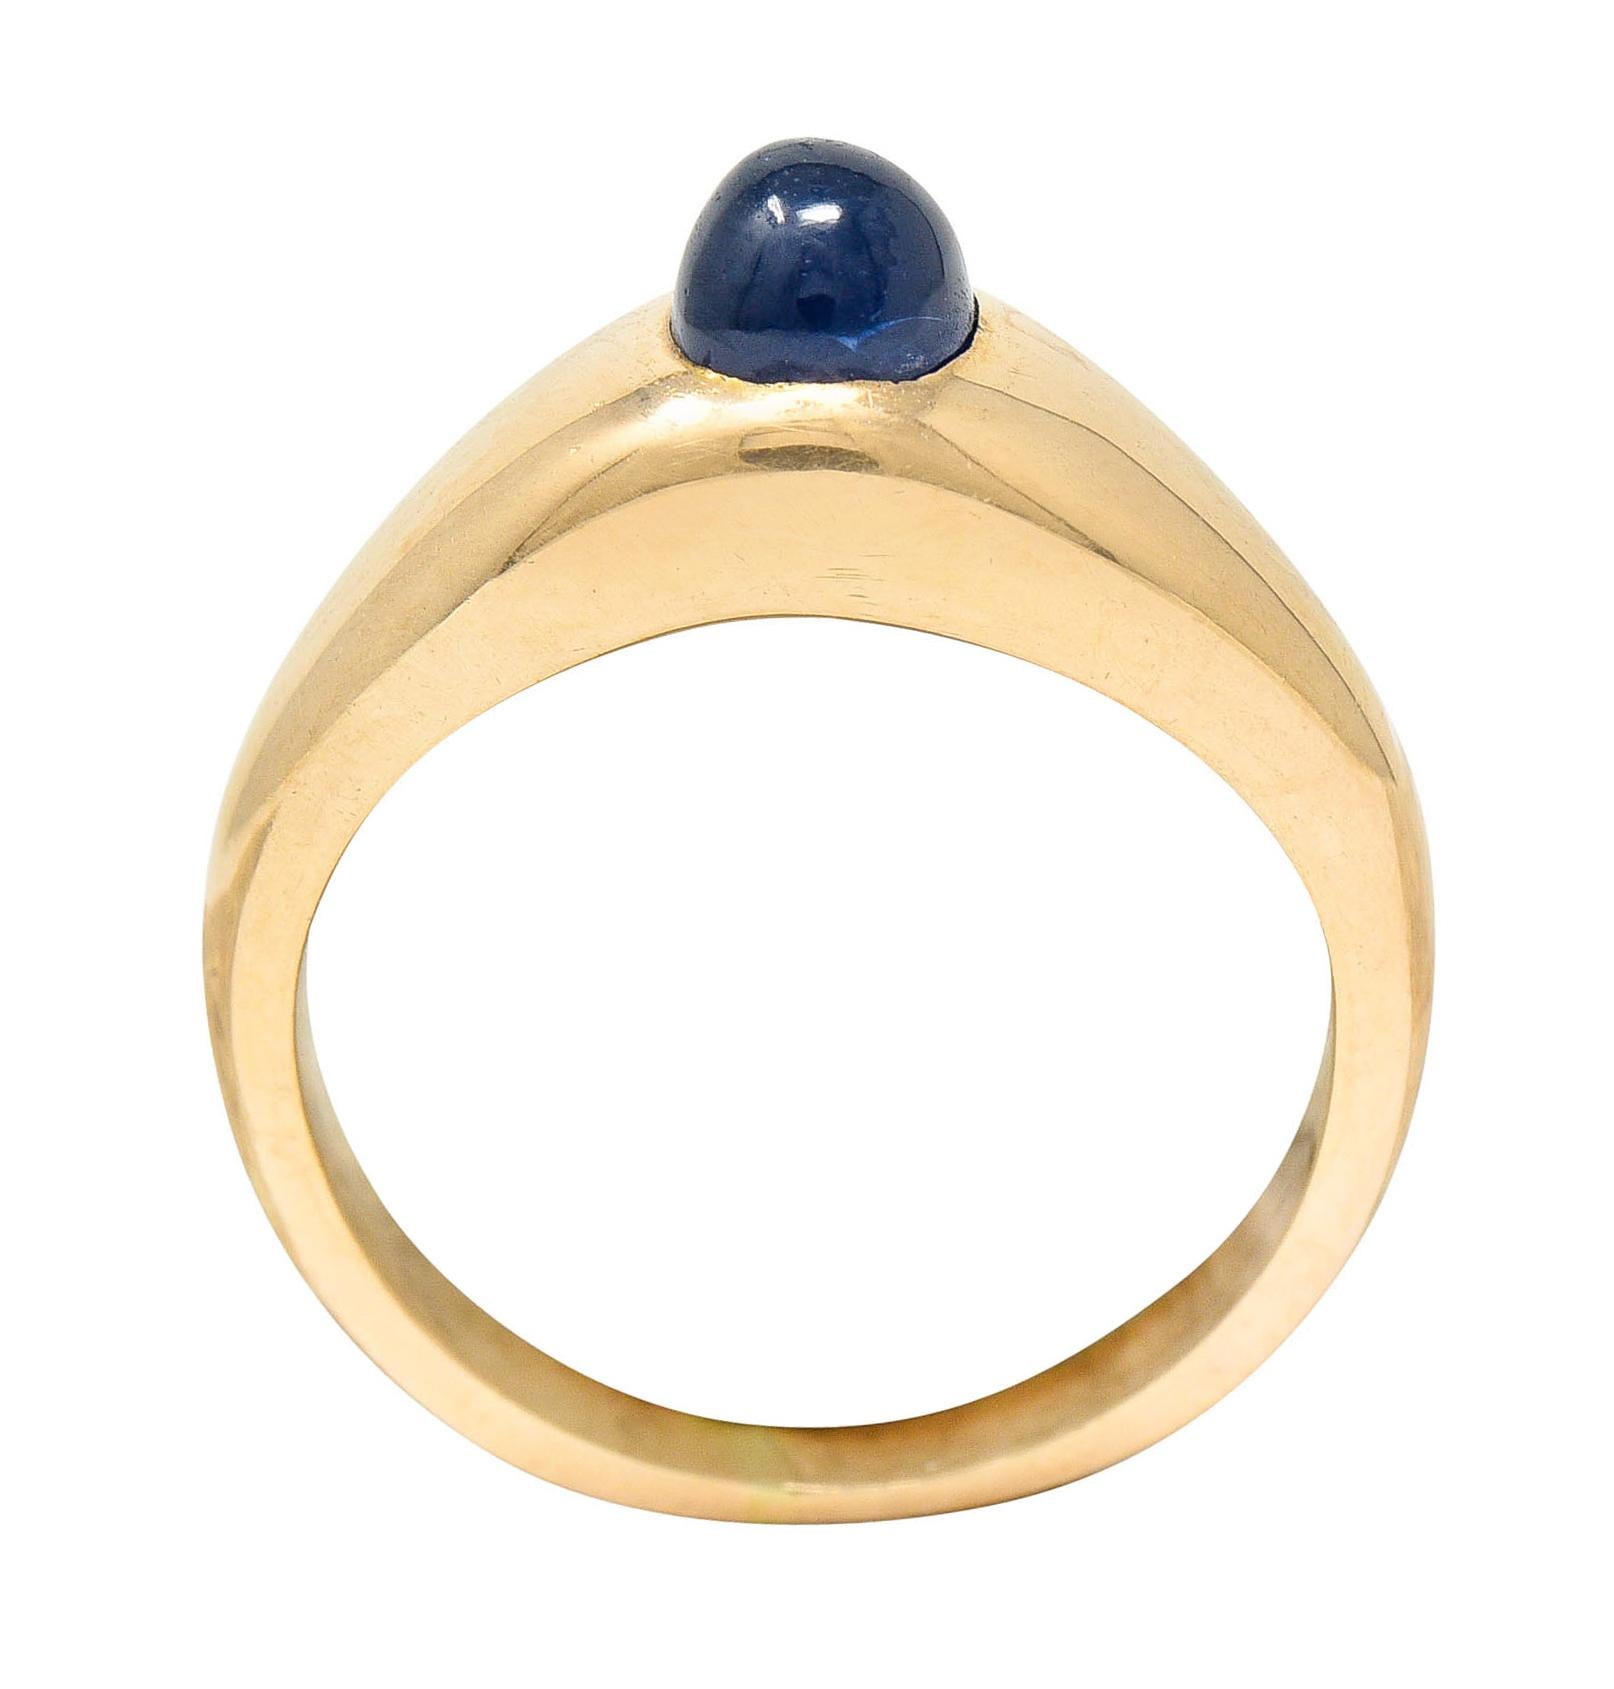 Bombè style band features a highly domed and gypsy set bullet cabochon of sapphire

Weighing approximately 0.75 carat - translucent and uniformly blue in color

Tested as 14 karat rose gold

Maker's mark for Black Starr & Frost

Circa: 1905

Ring